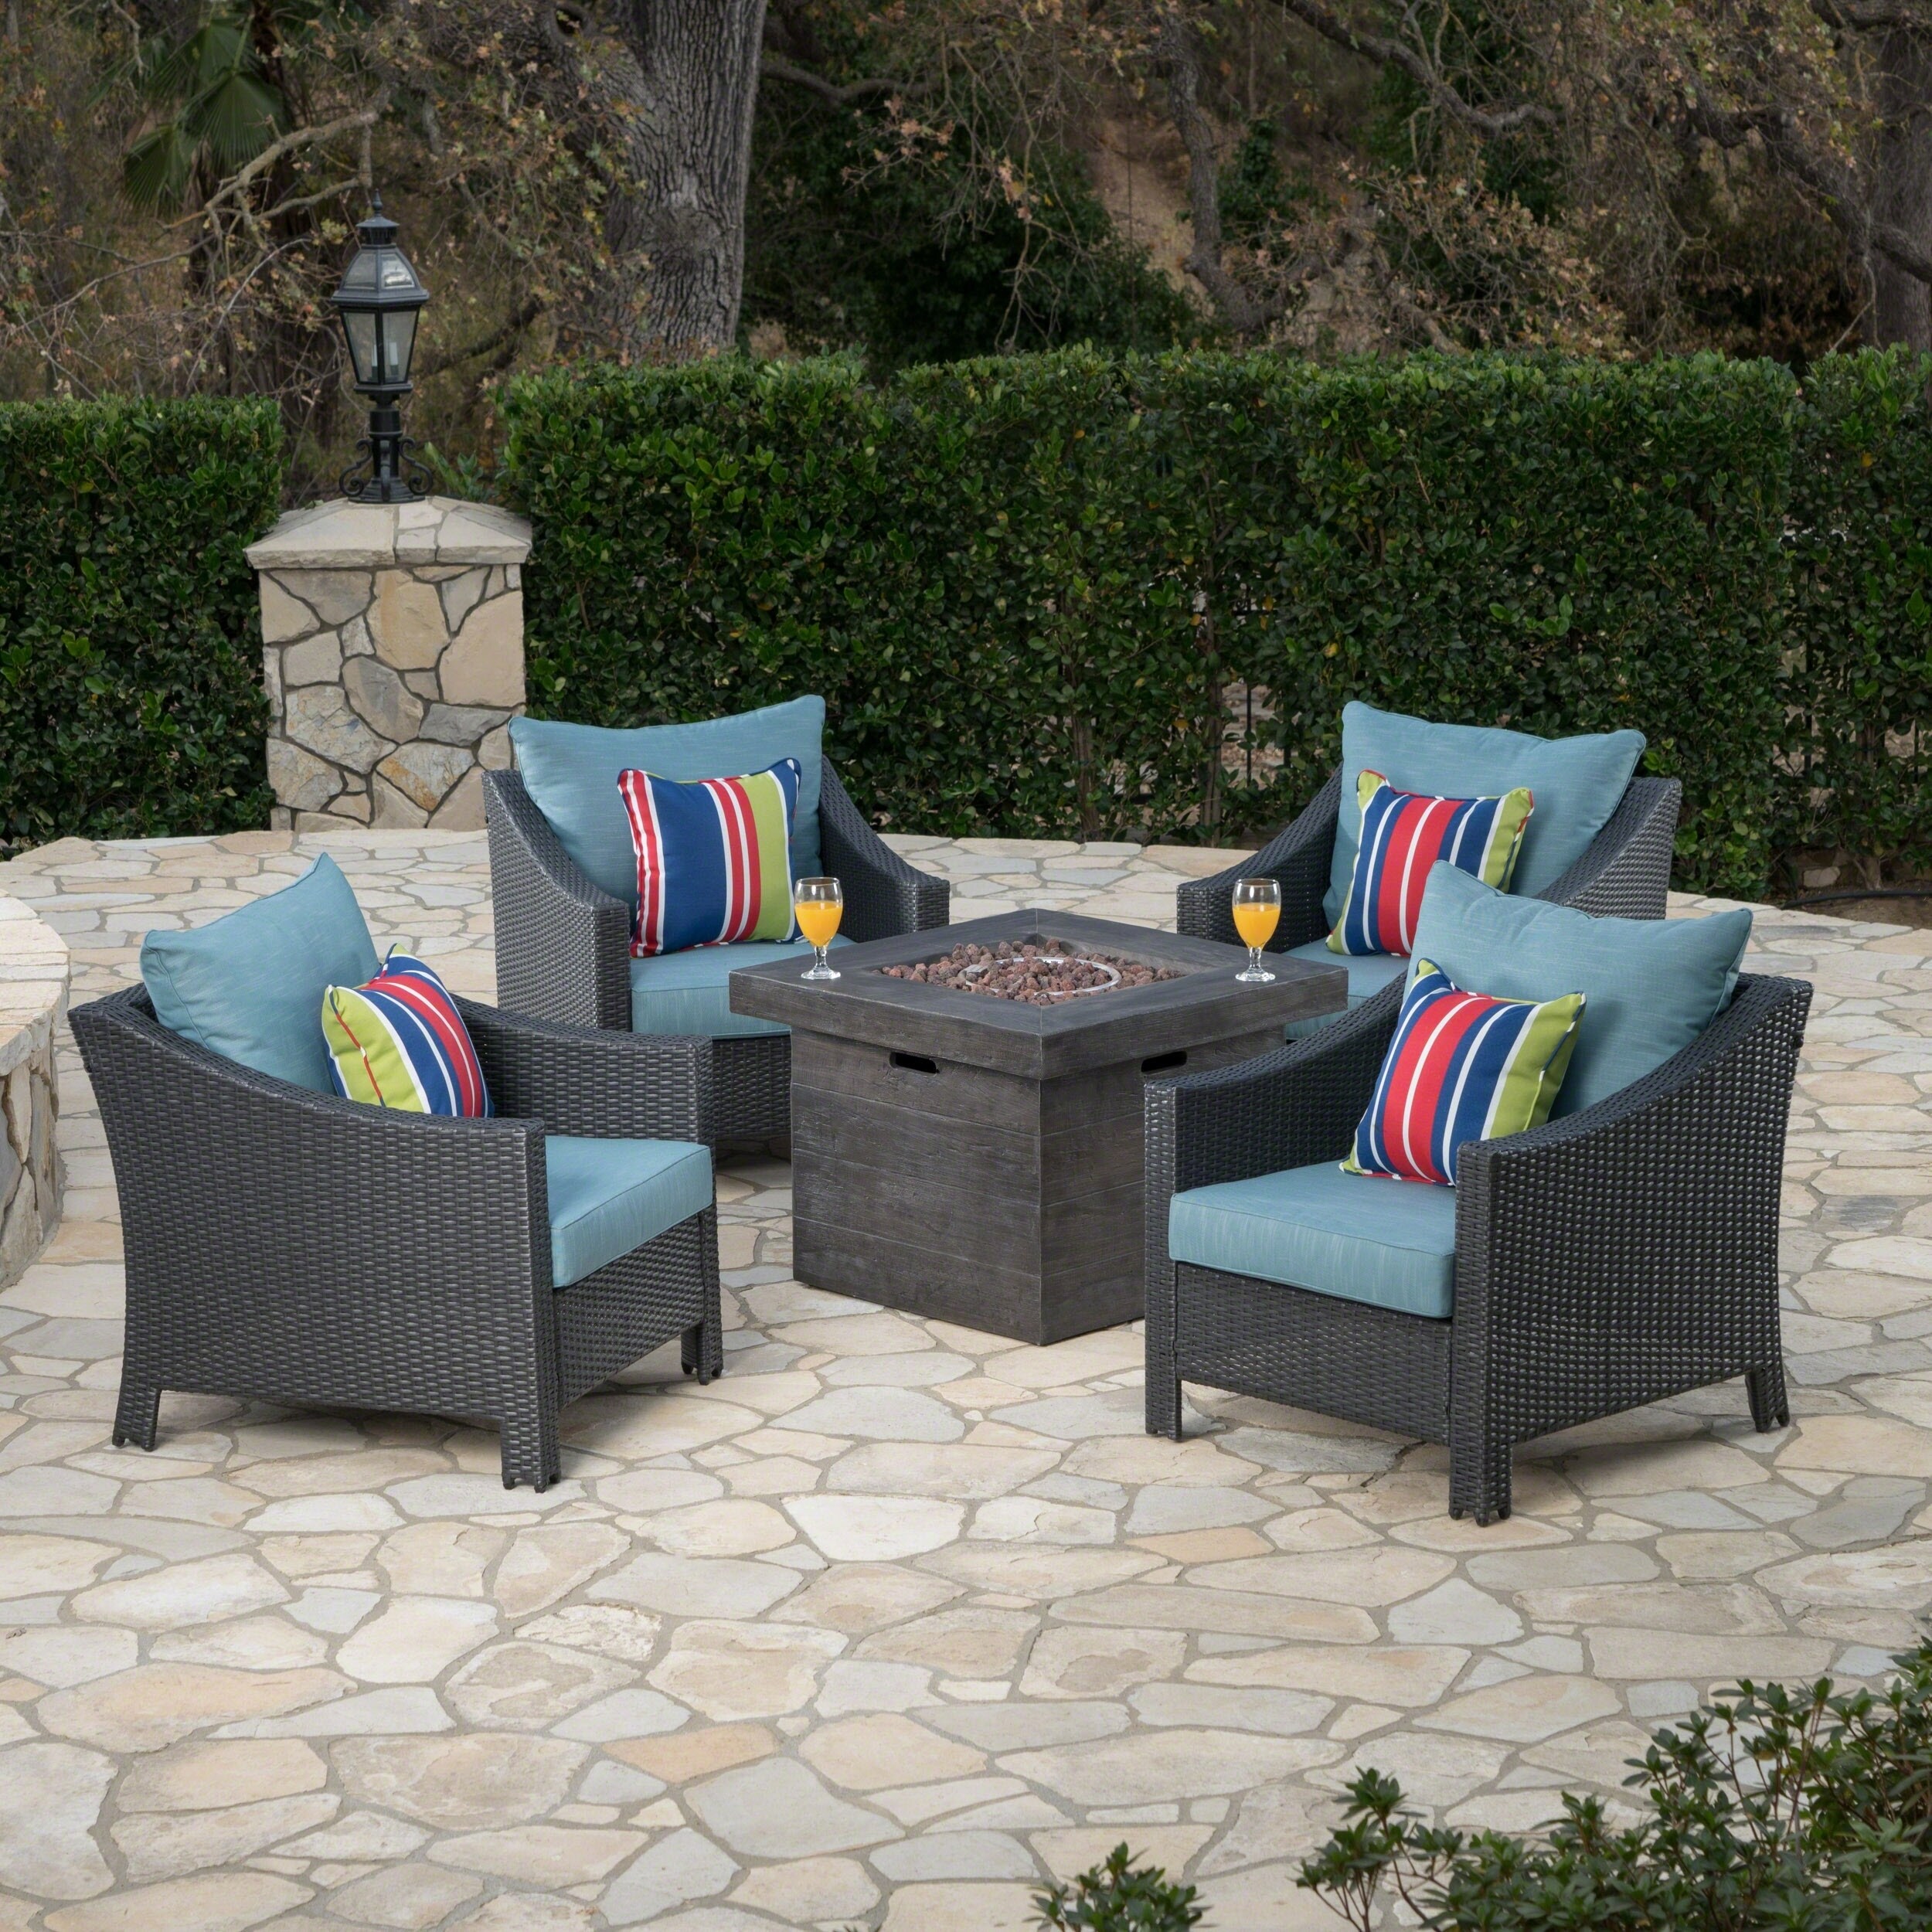 Antibes Outdoor 5-piece Wicker Club Chair Set with Square | eBay